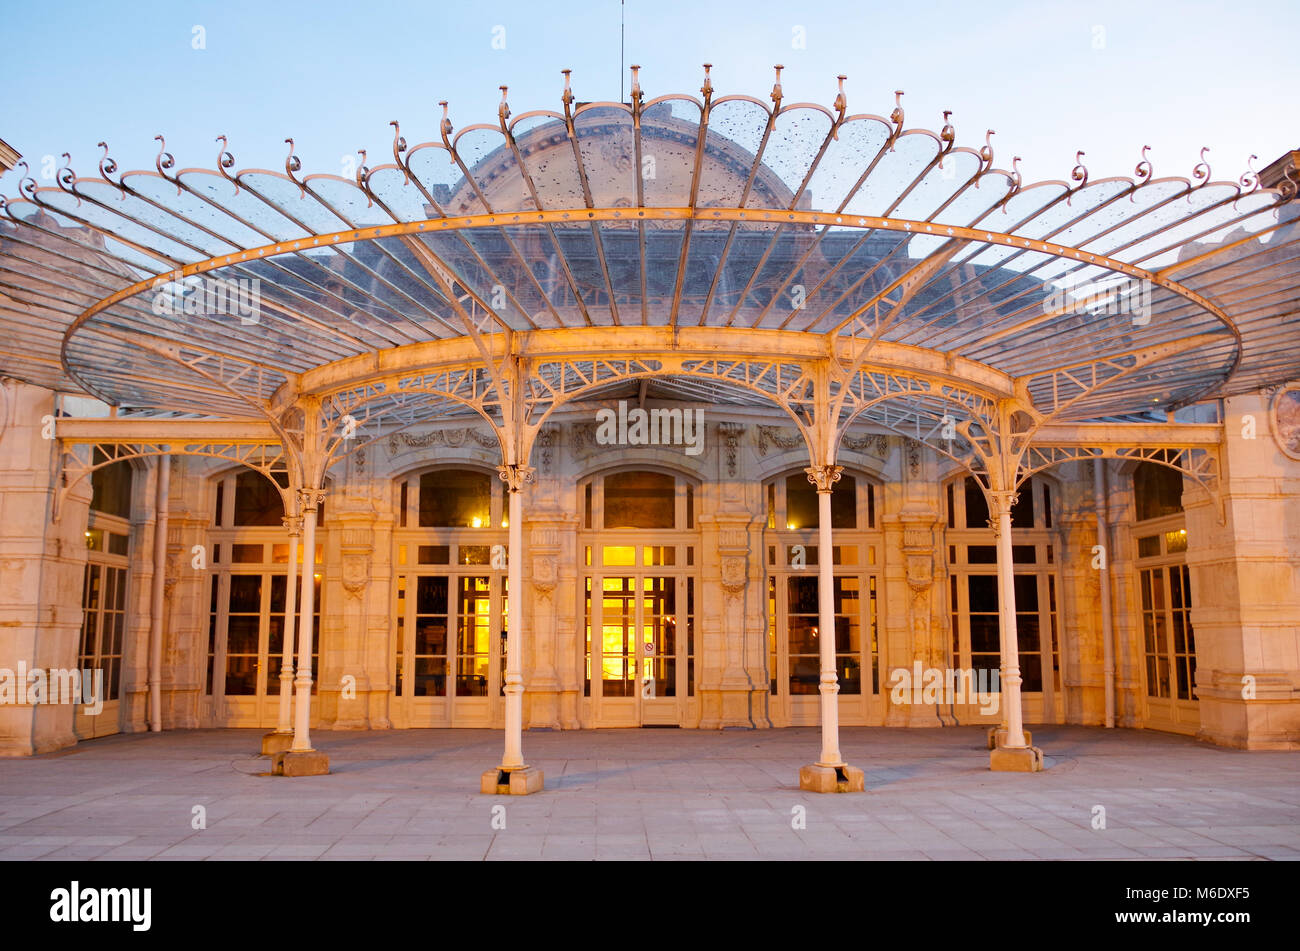 Main entrance to the Vichy opera house in the light cast by a setting sun. The famous opera house was constructed by Charles Le Cœur. Stock Photo